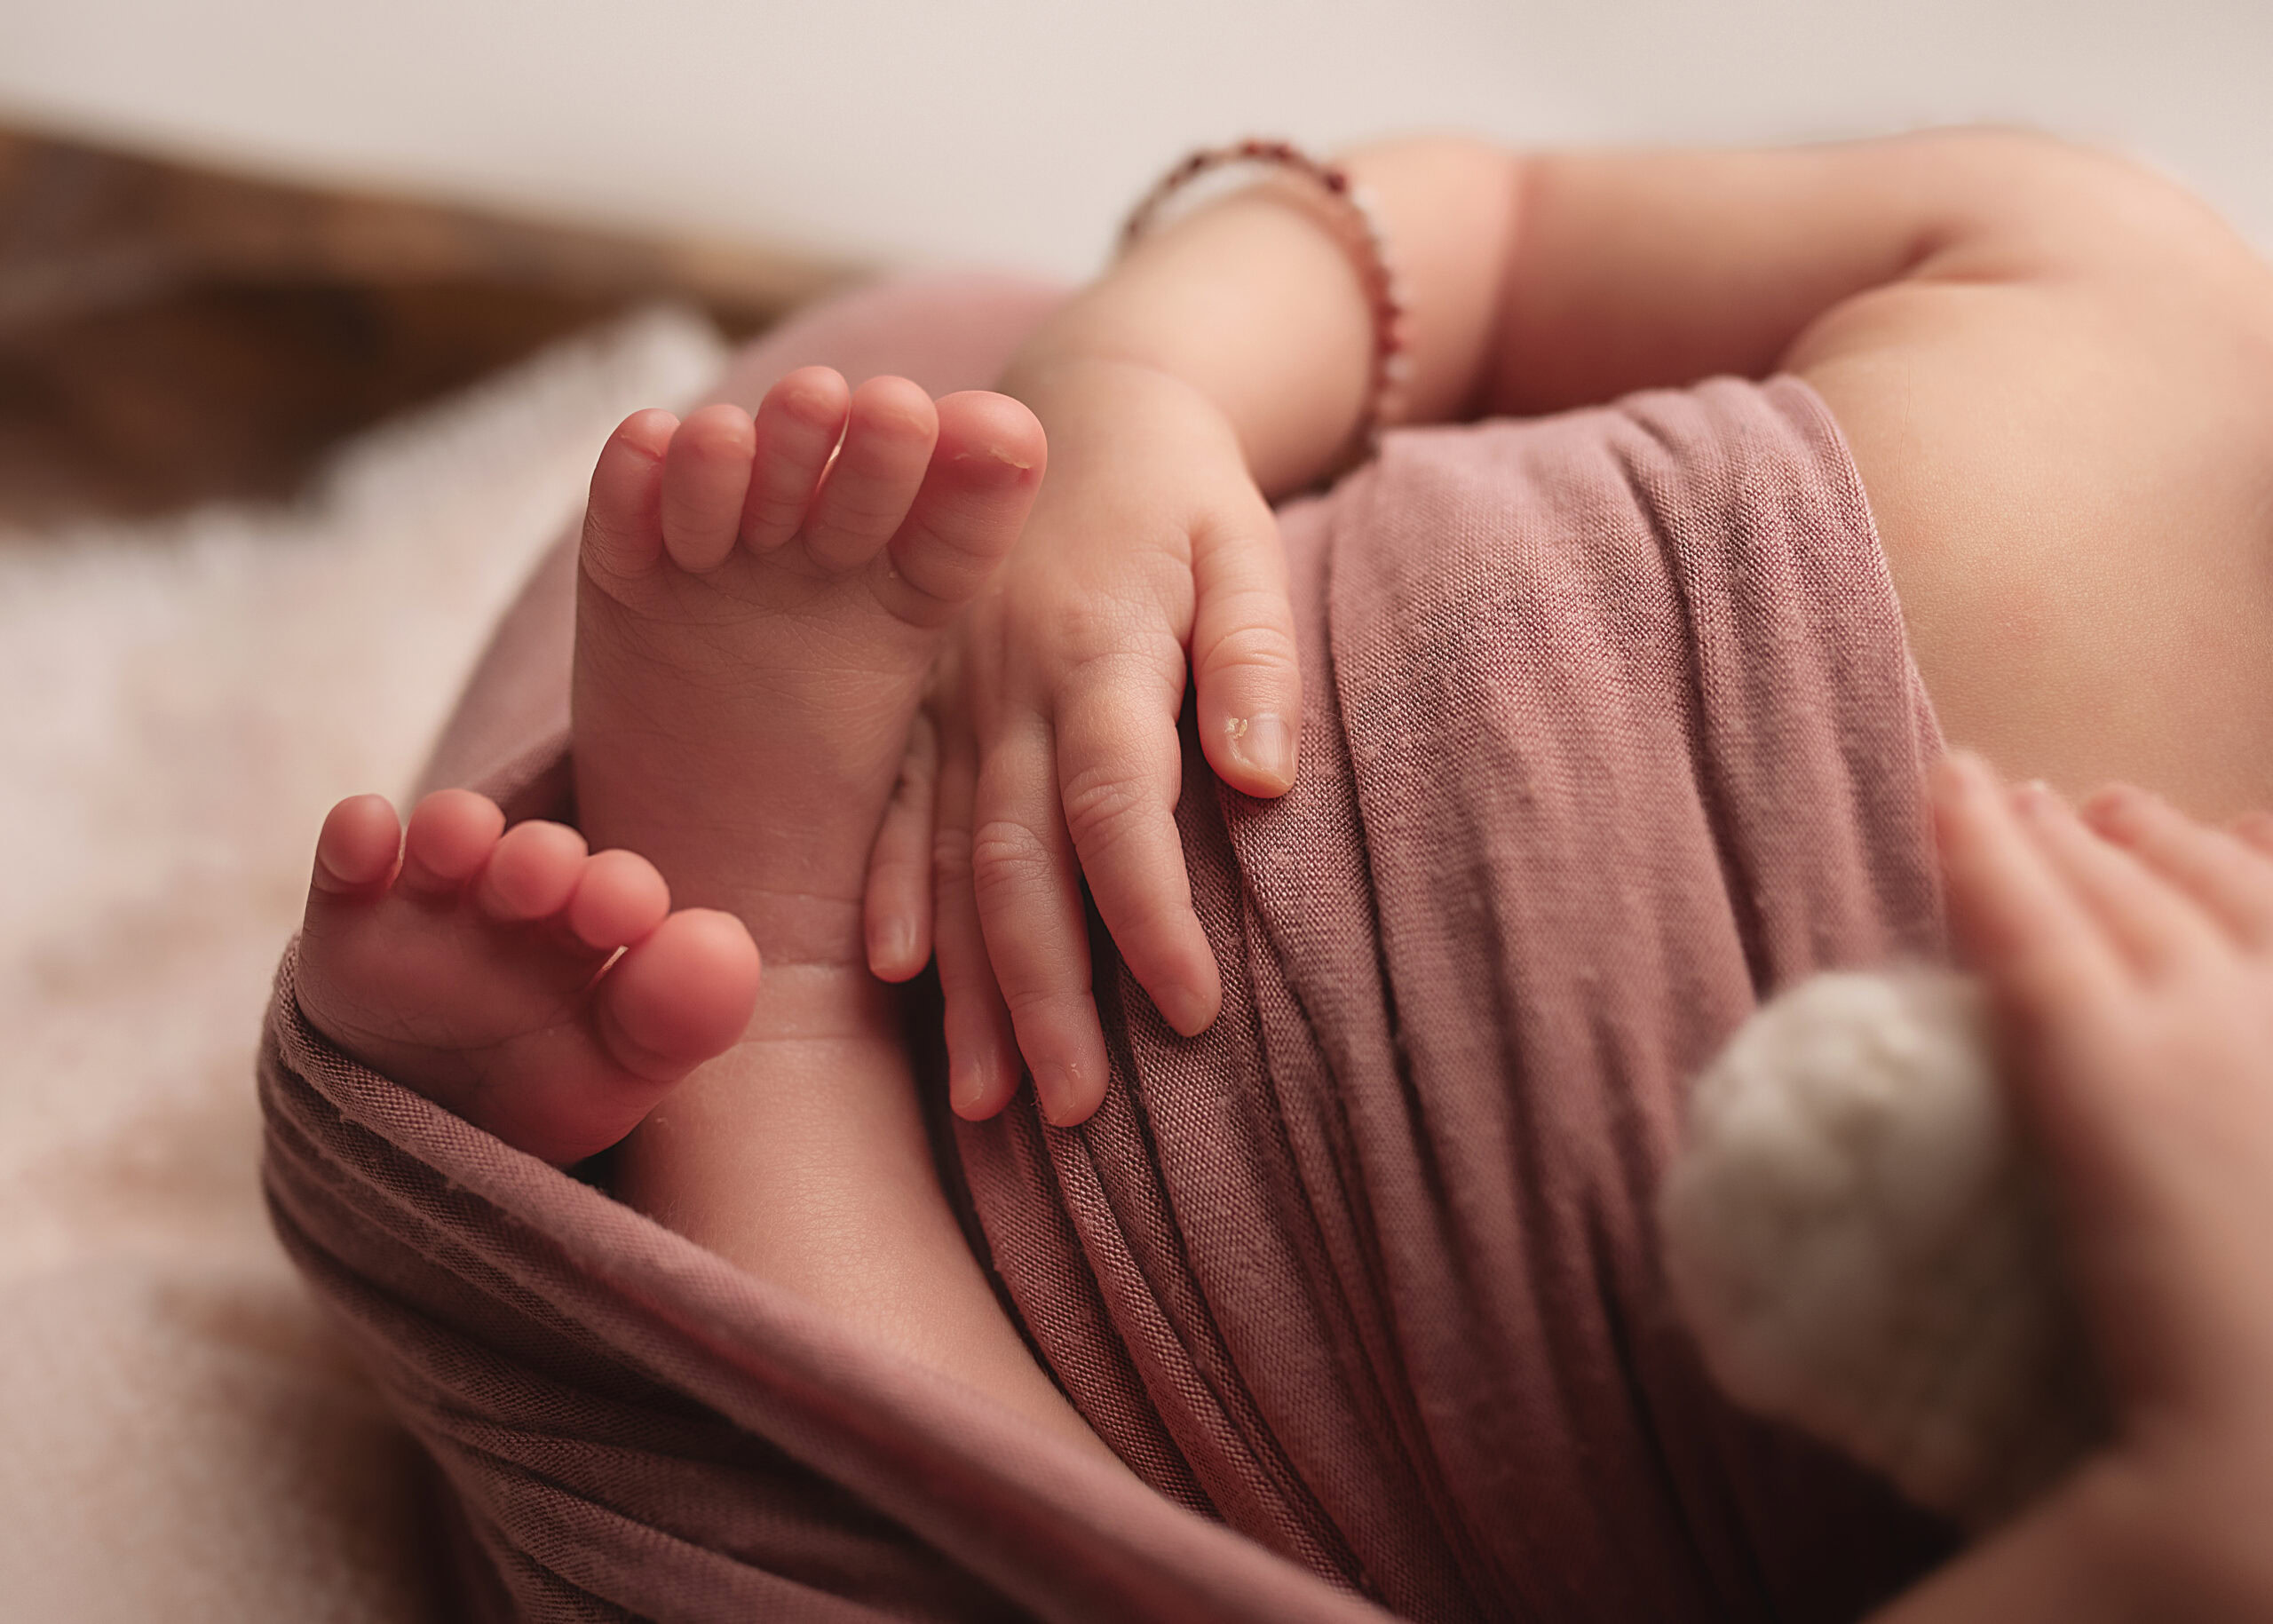 grand rapids newborn photo session close up of baby's hands and toes